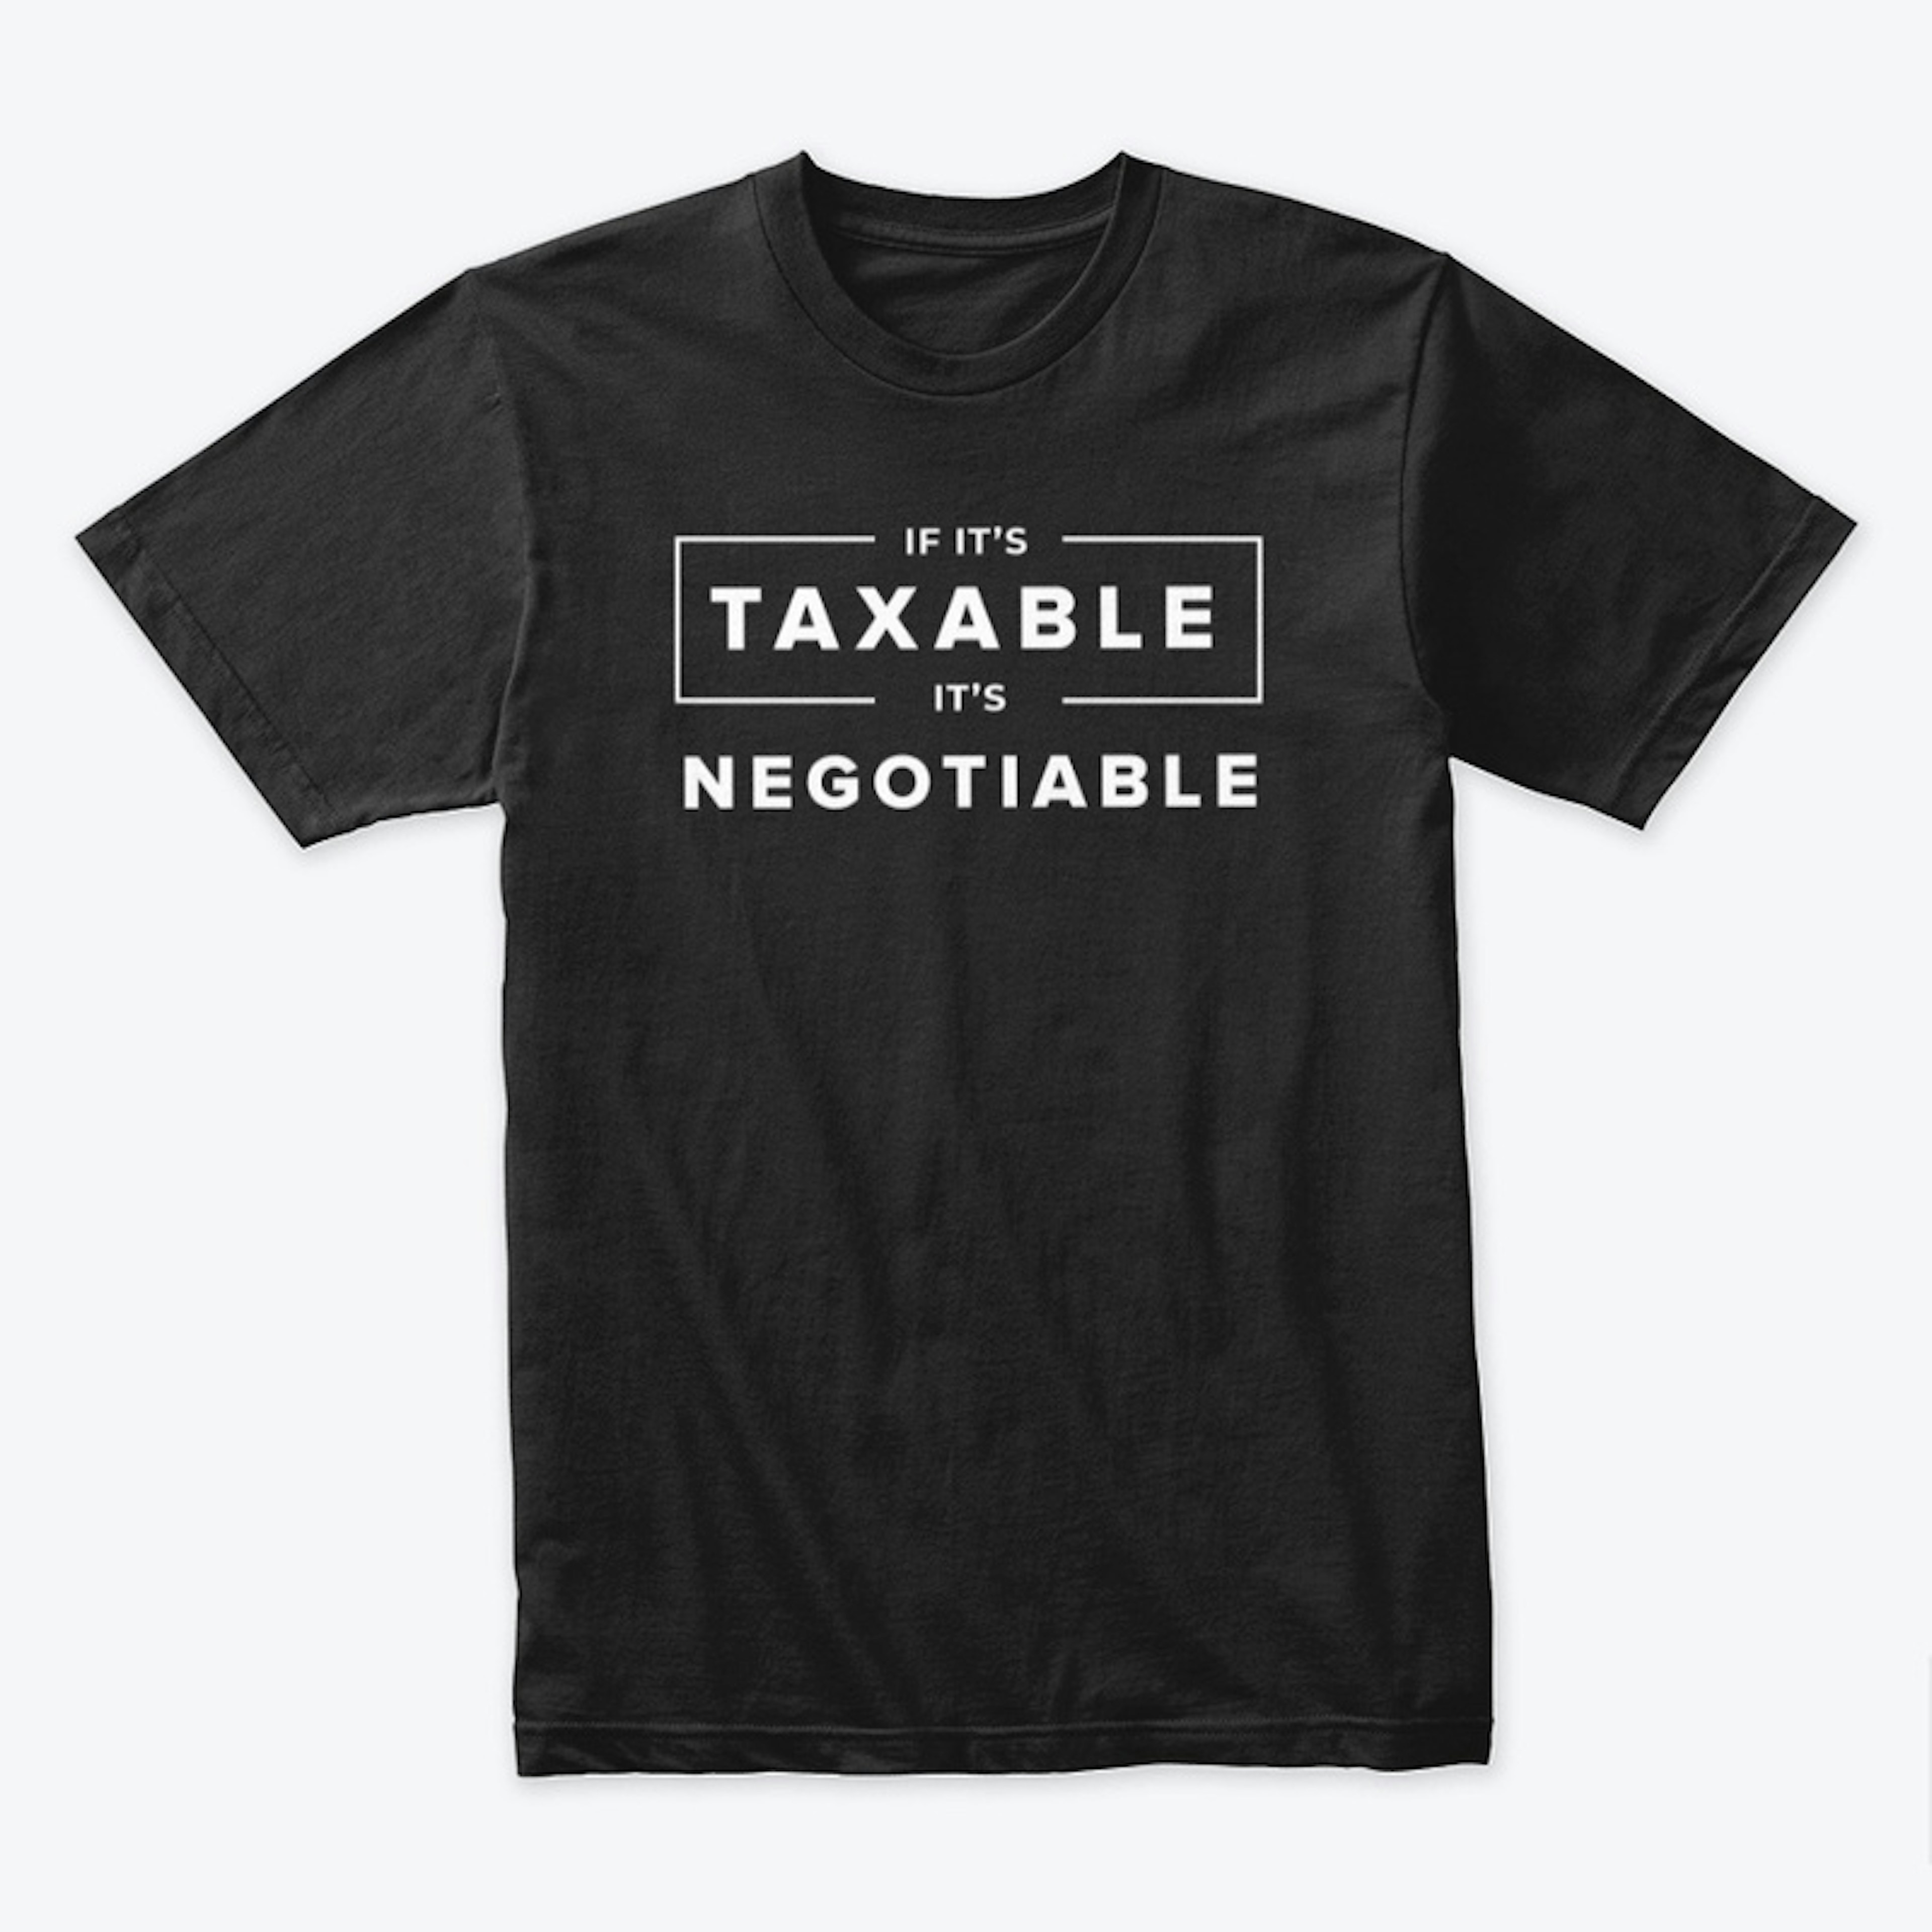 If It's Taxable, It's Negotiable